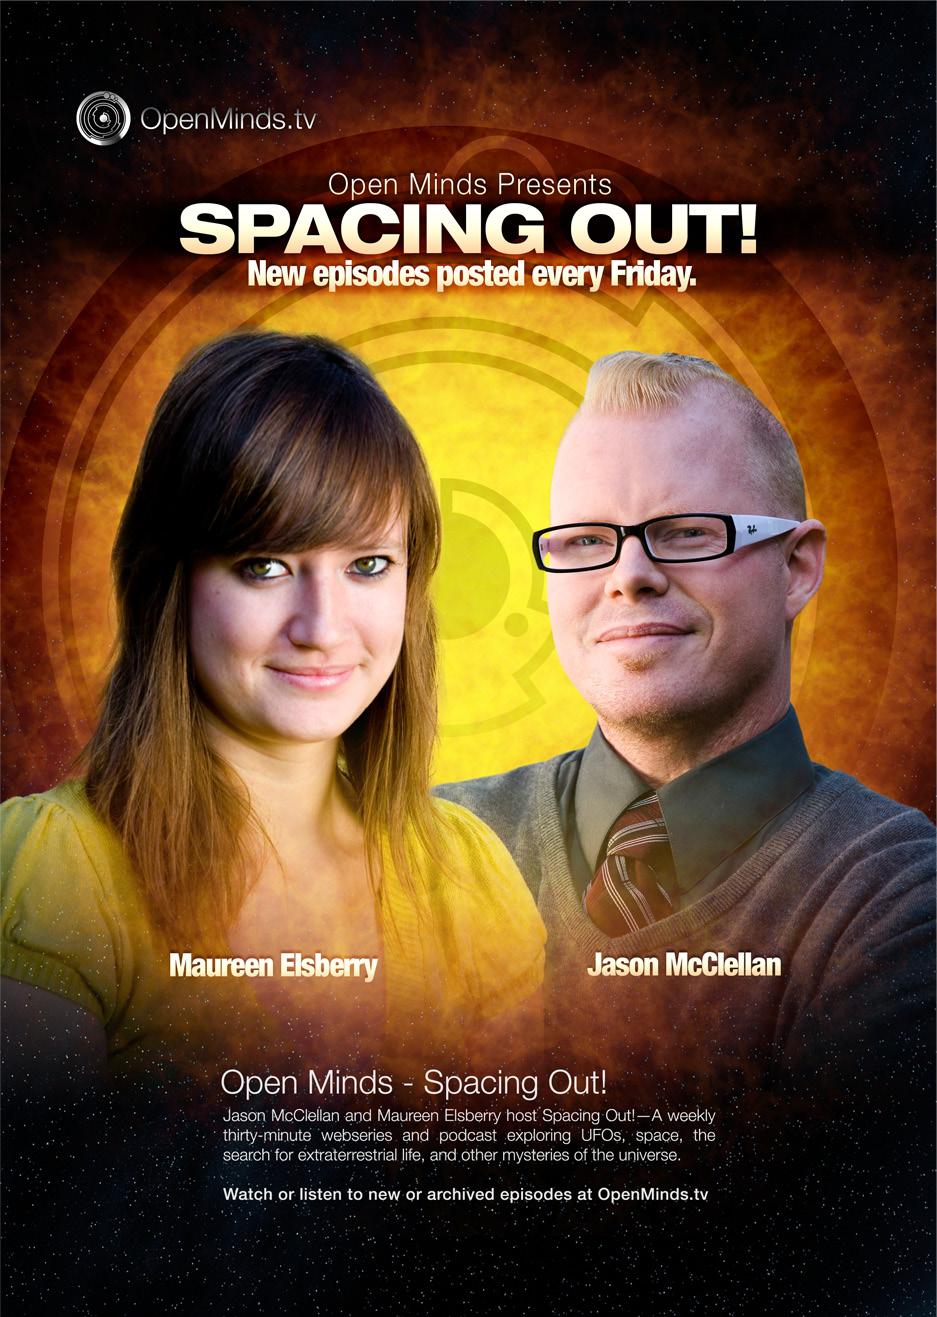 Open Minds Radio: Spacing Out Open Minds presents Spacing Out! Jason McClellan and Maureen Elsberry host Spacing Out!